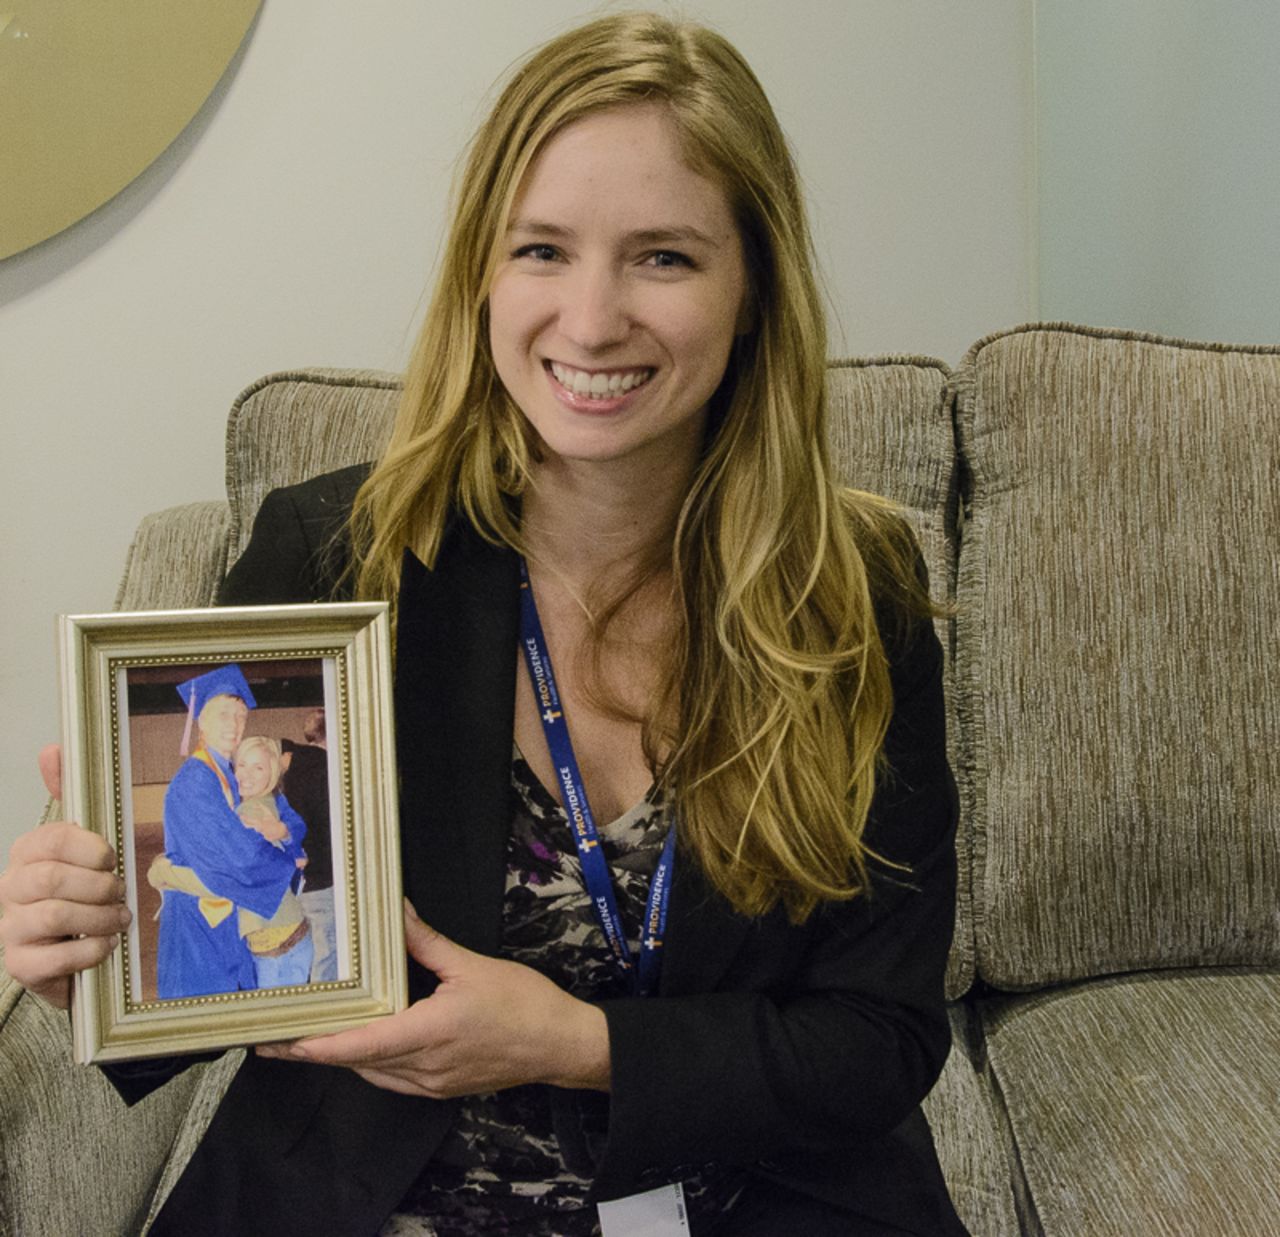 Erin Schwantner keeps the photo of her and her brother after his high school graduation on her desk at work.